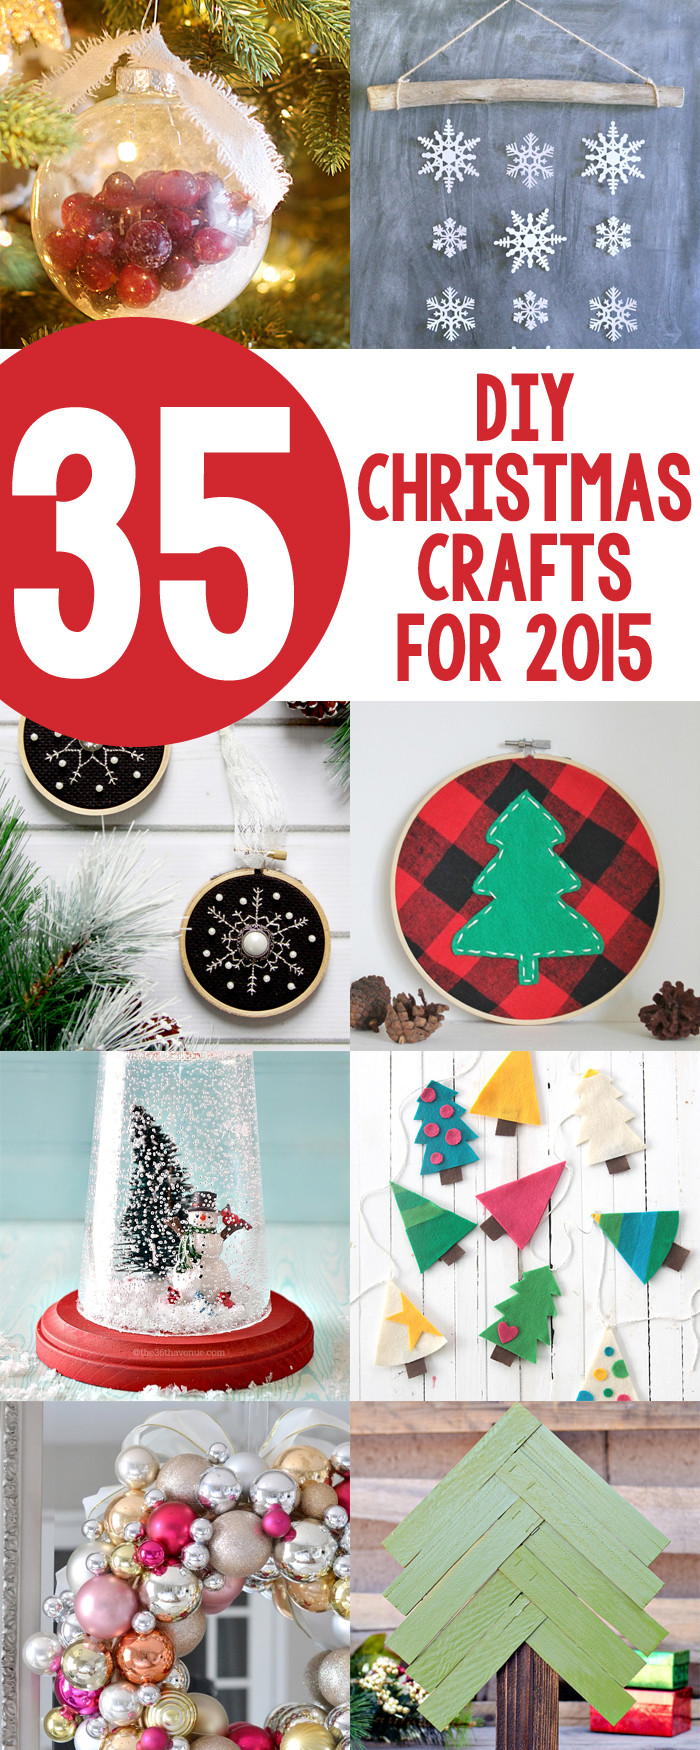 DIY Craft For Christmas
 35 DIY Christmas Crafts for 2015 Yellow Bliss Road